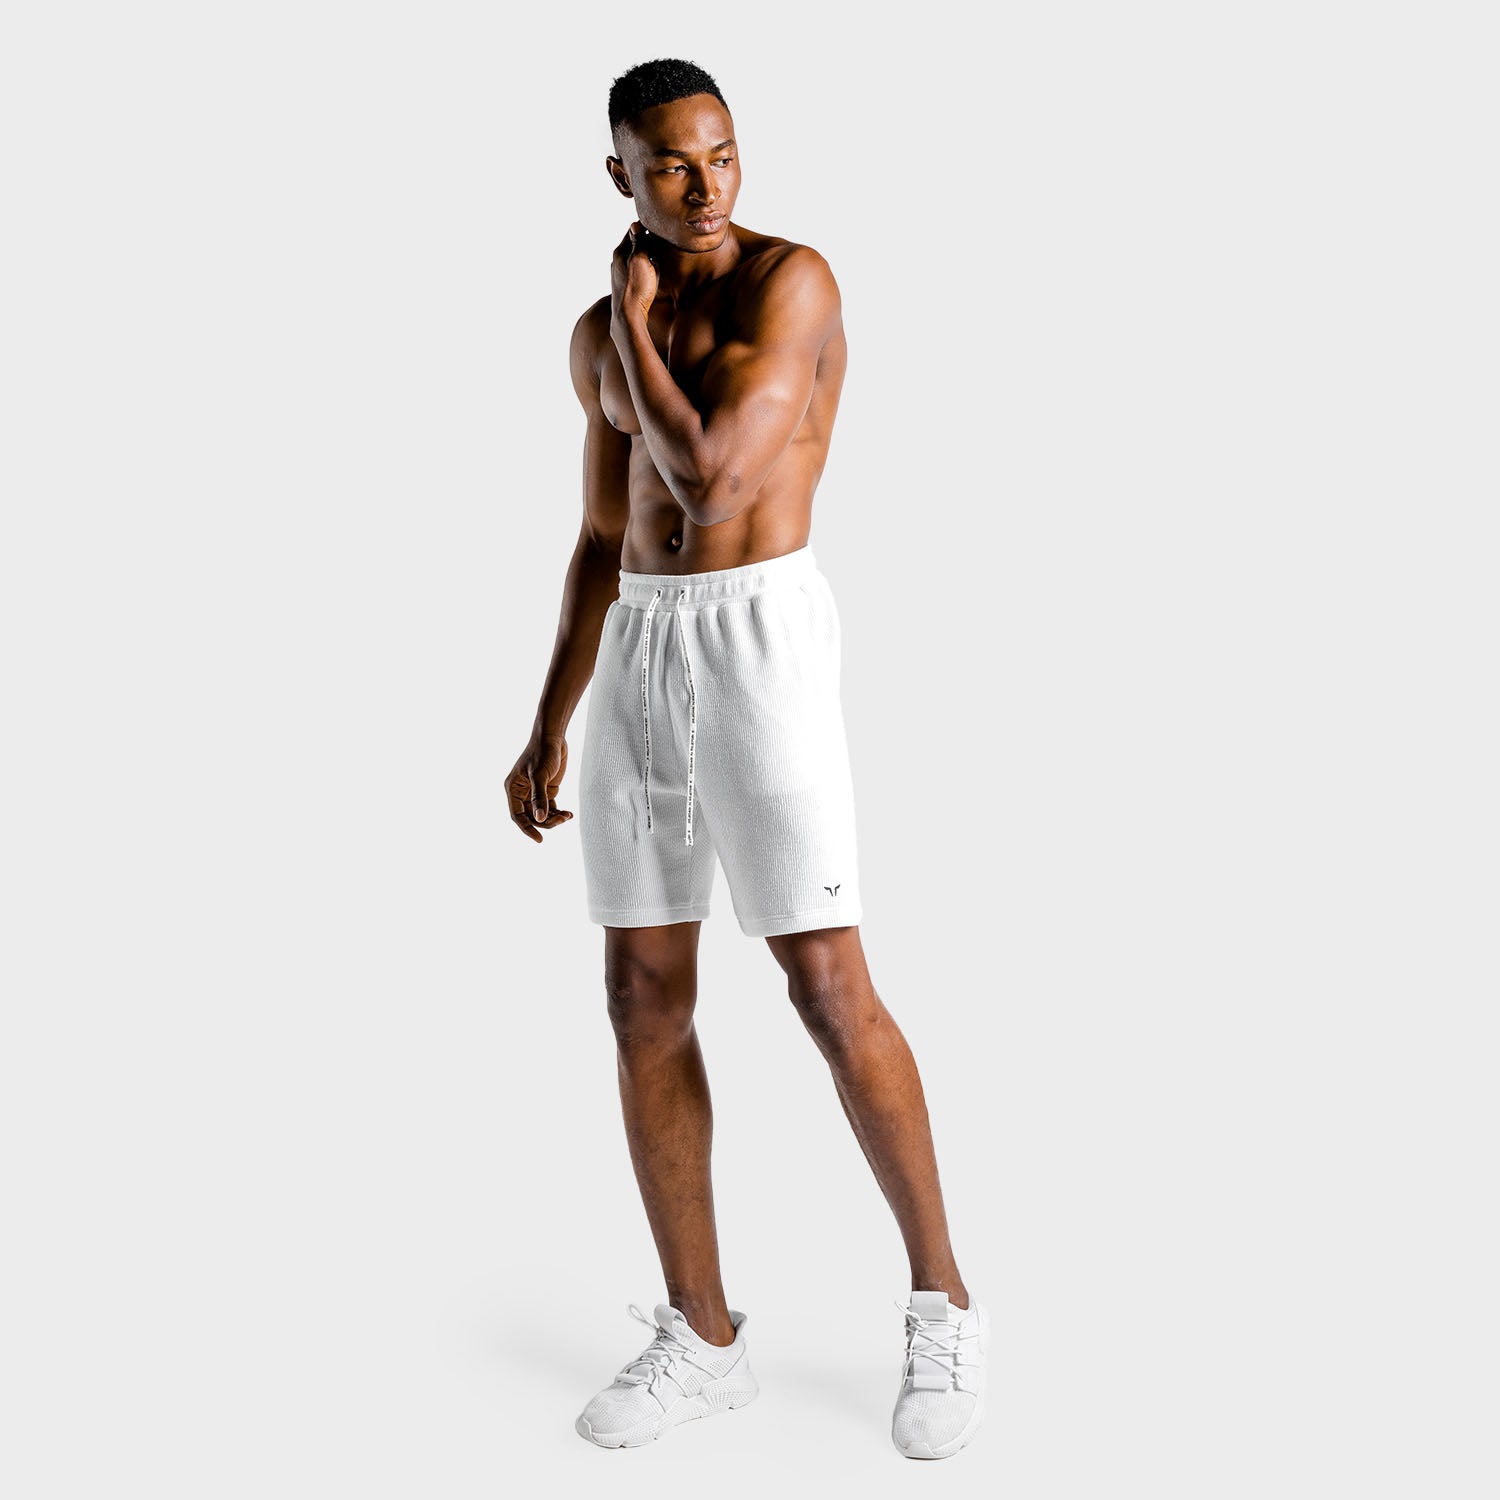 squatwolf-workout-short-for-men-luxe-shorts-white-gym-wear